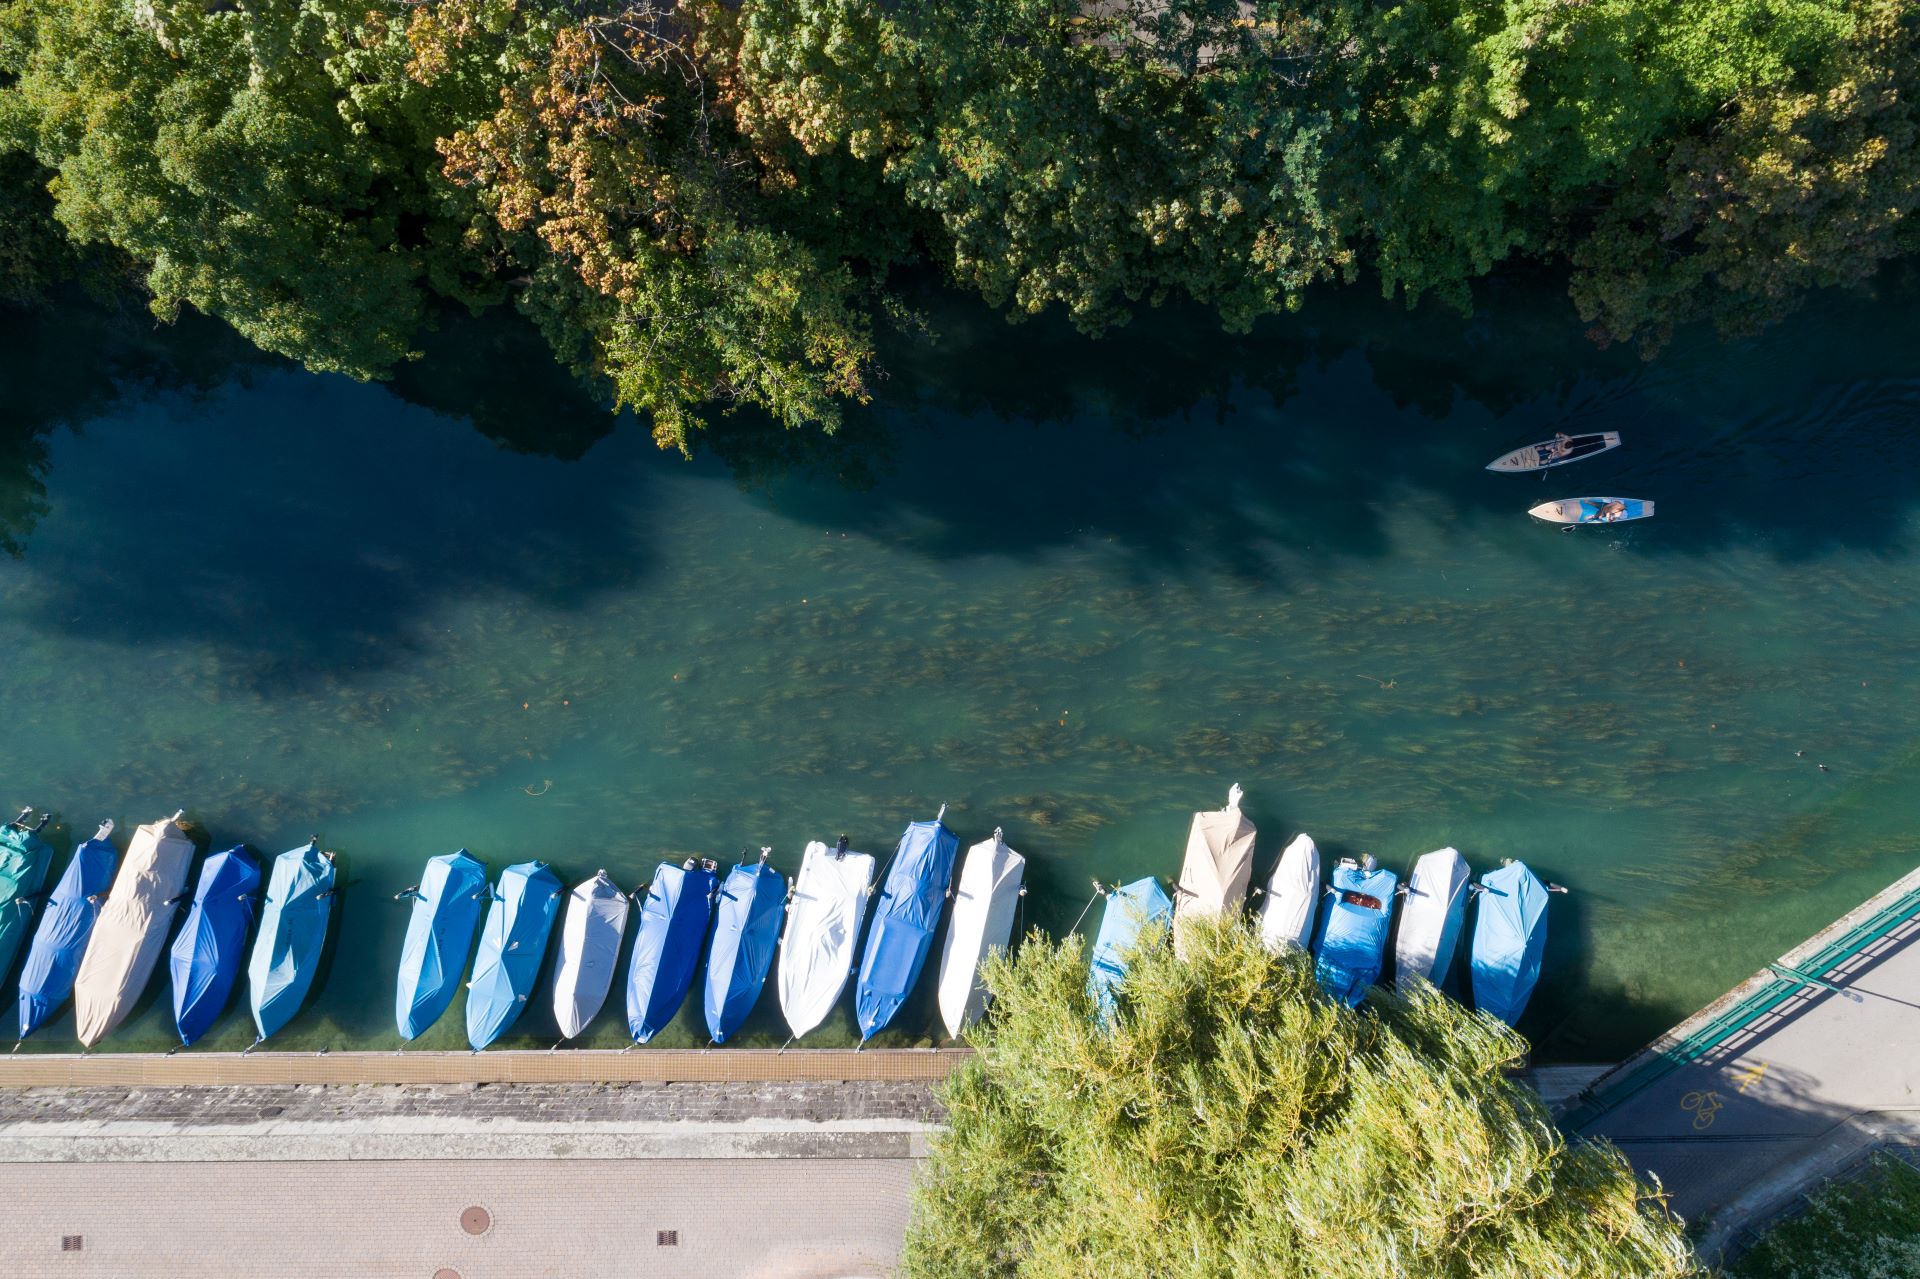 Aerial view of a calm riverbank with moored boats covered in blue and beige tarpaulin, alongside a paved walkway. Two individuals are seen stand-up paddling on the water, with lush trees lining the river's edge.